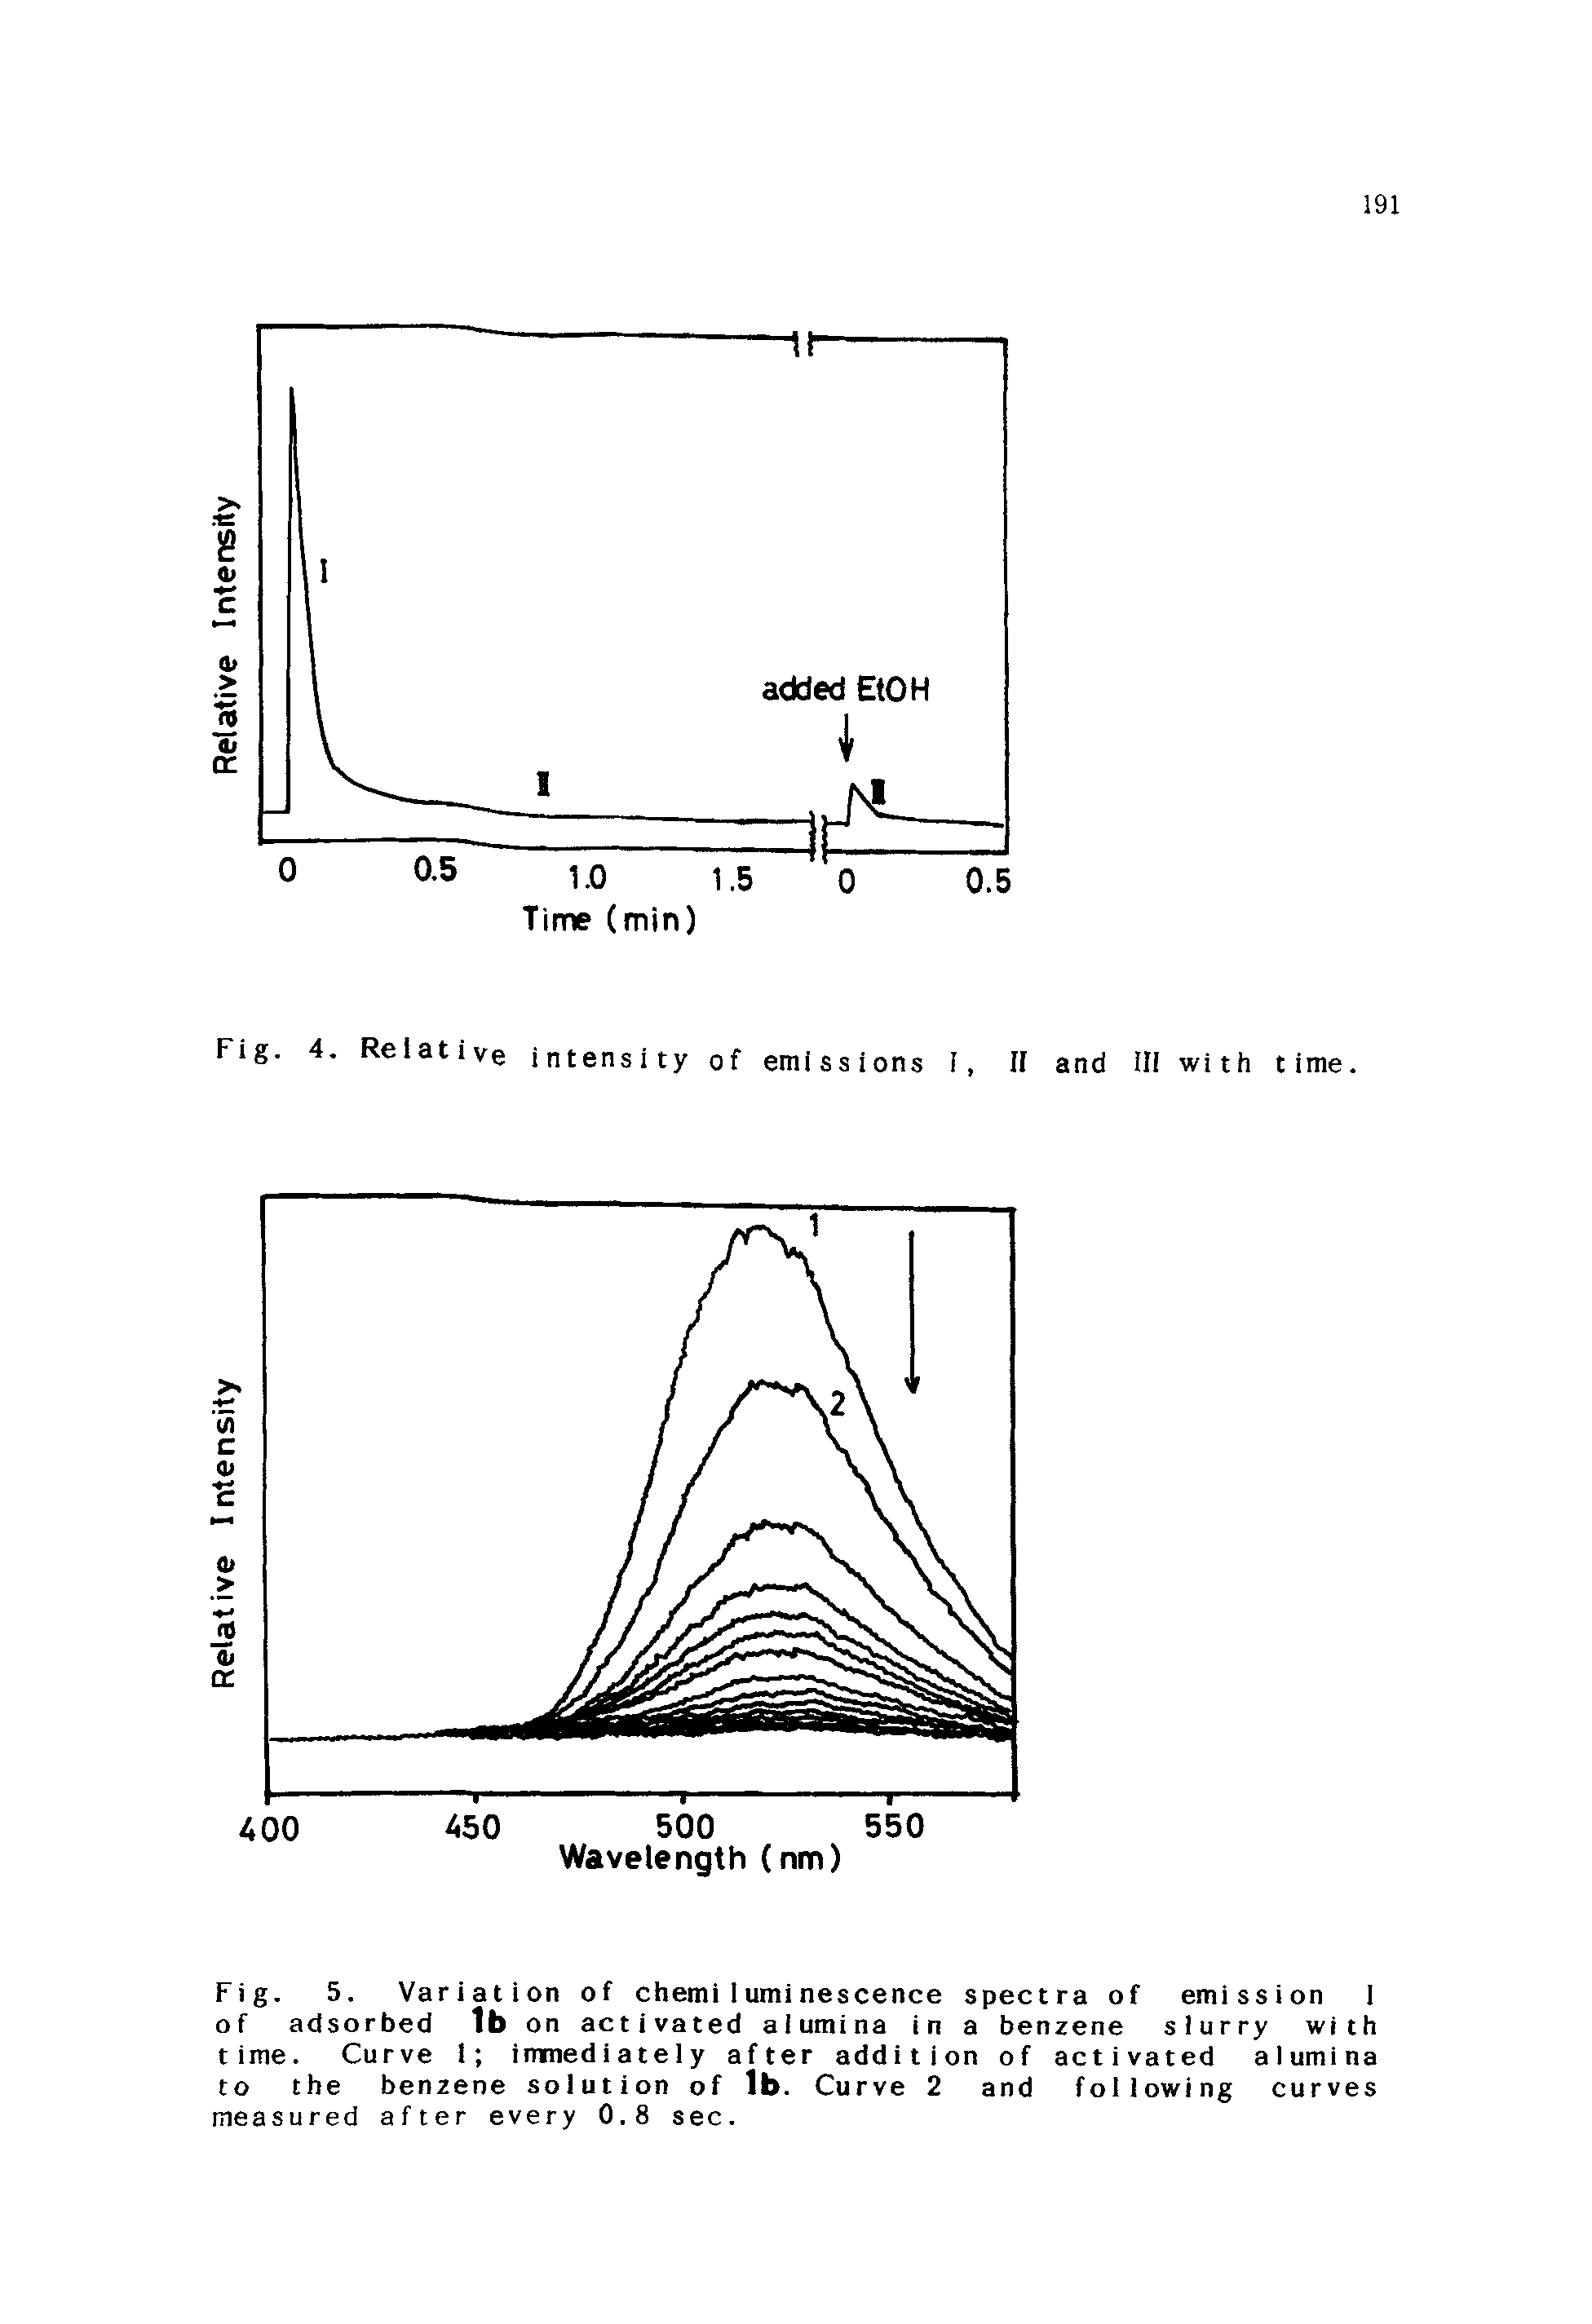 Fig. 5. Variation of chemiluminescence spectra of emission 1 of adsorbed 1b on activated alumina in a benzene slurry with time. Curve 1 immediately after addition of activated alumina to the benzene solution of lb. Curve 2 and following curves measured after every 0.8 sec.